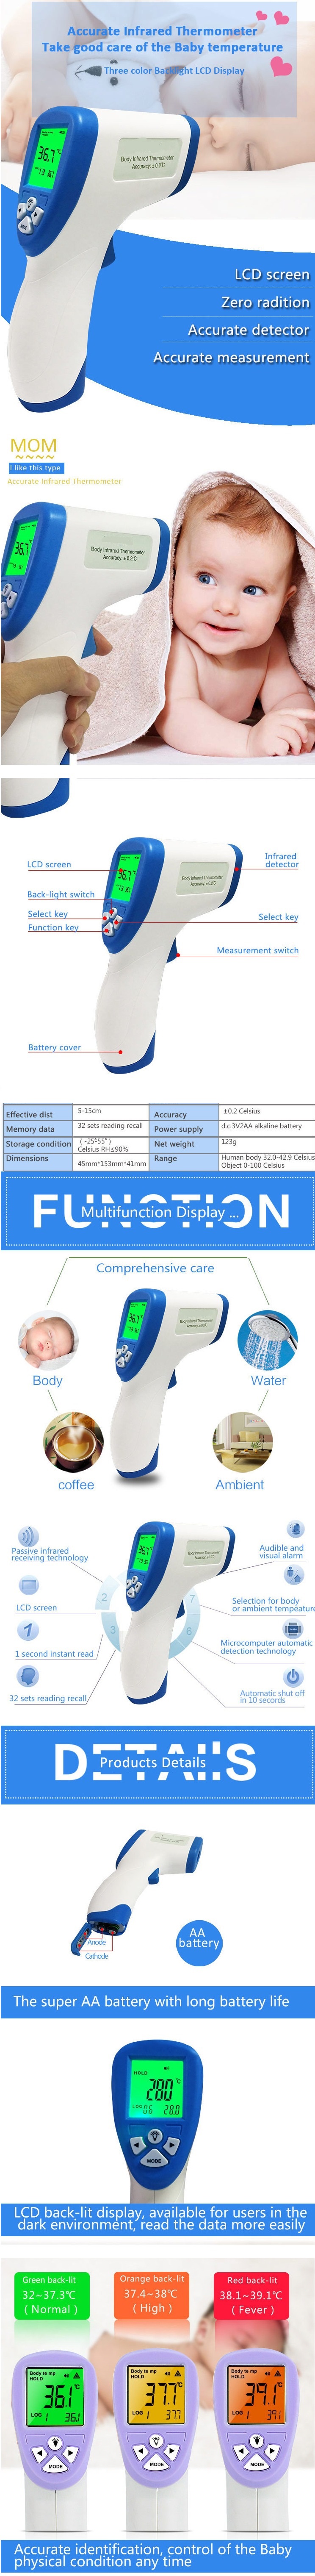 TS-A1 Forehead Thermometer, DT-8806C Forehead Thermometer, Body Infrared Thermometer,